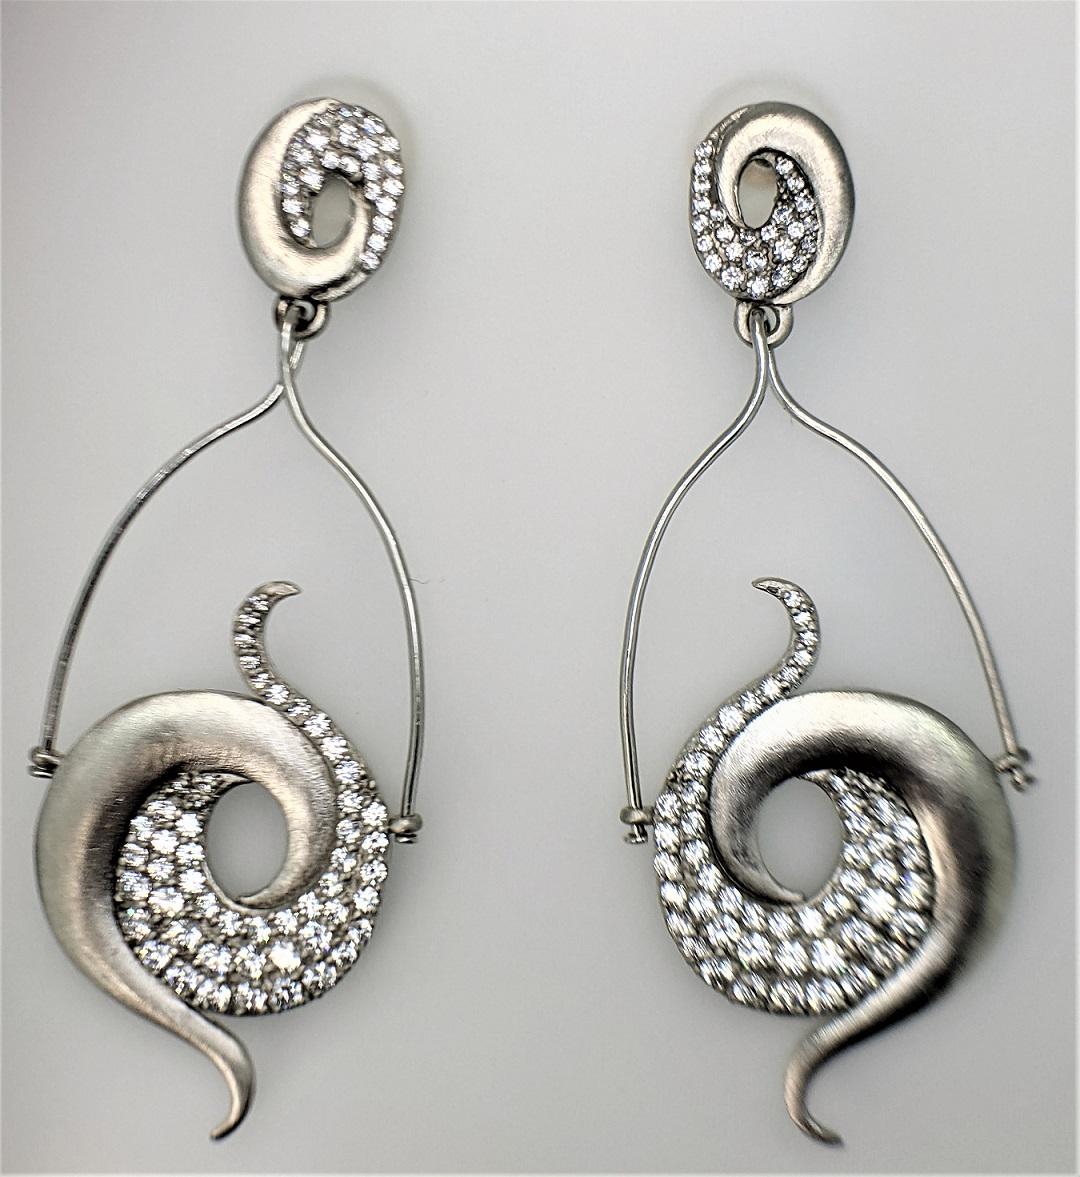 Double Galaxy Earrings Dangle Earrings in Sterling with Sparkling White Stones In New Condition For Sale In Carlisle, MA